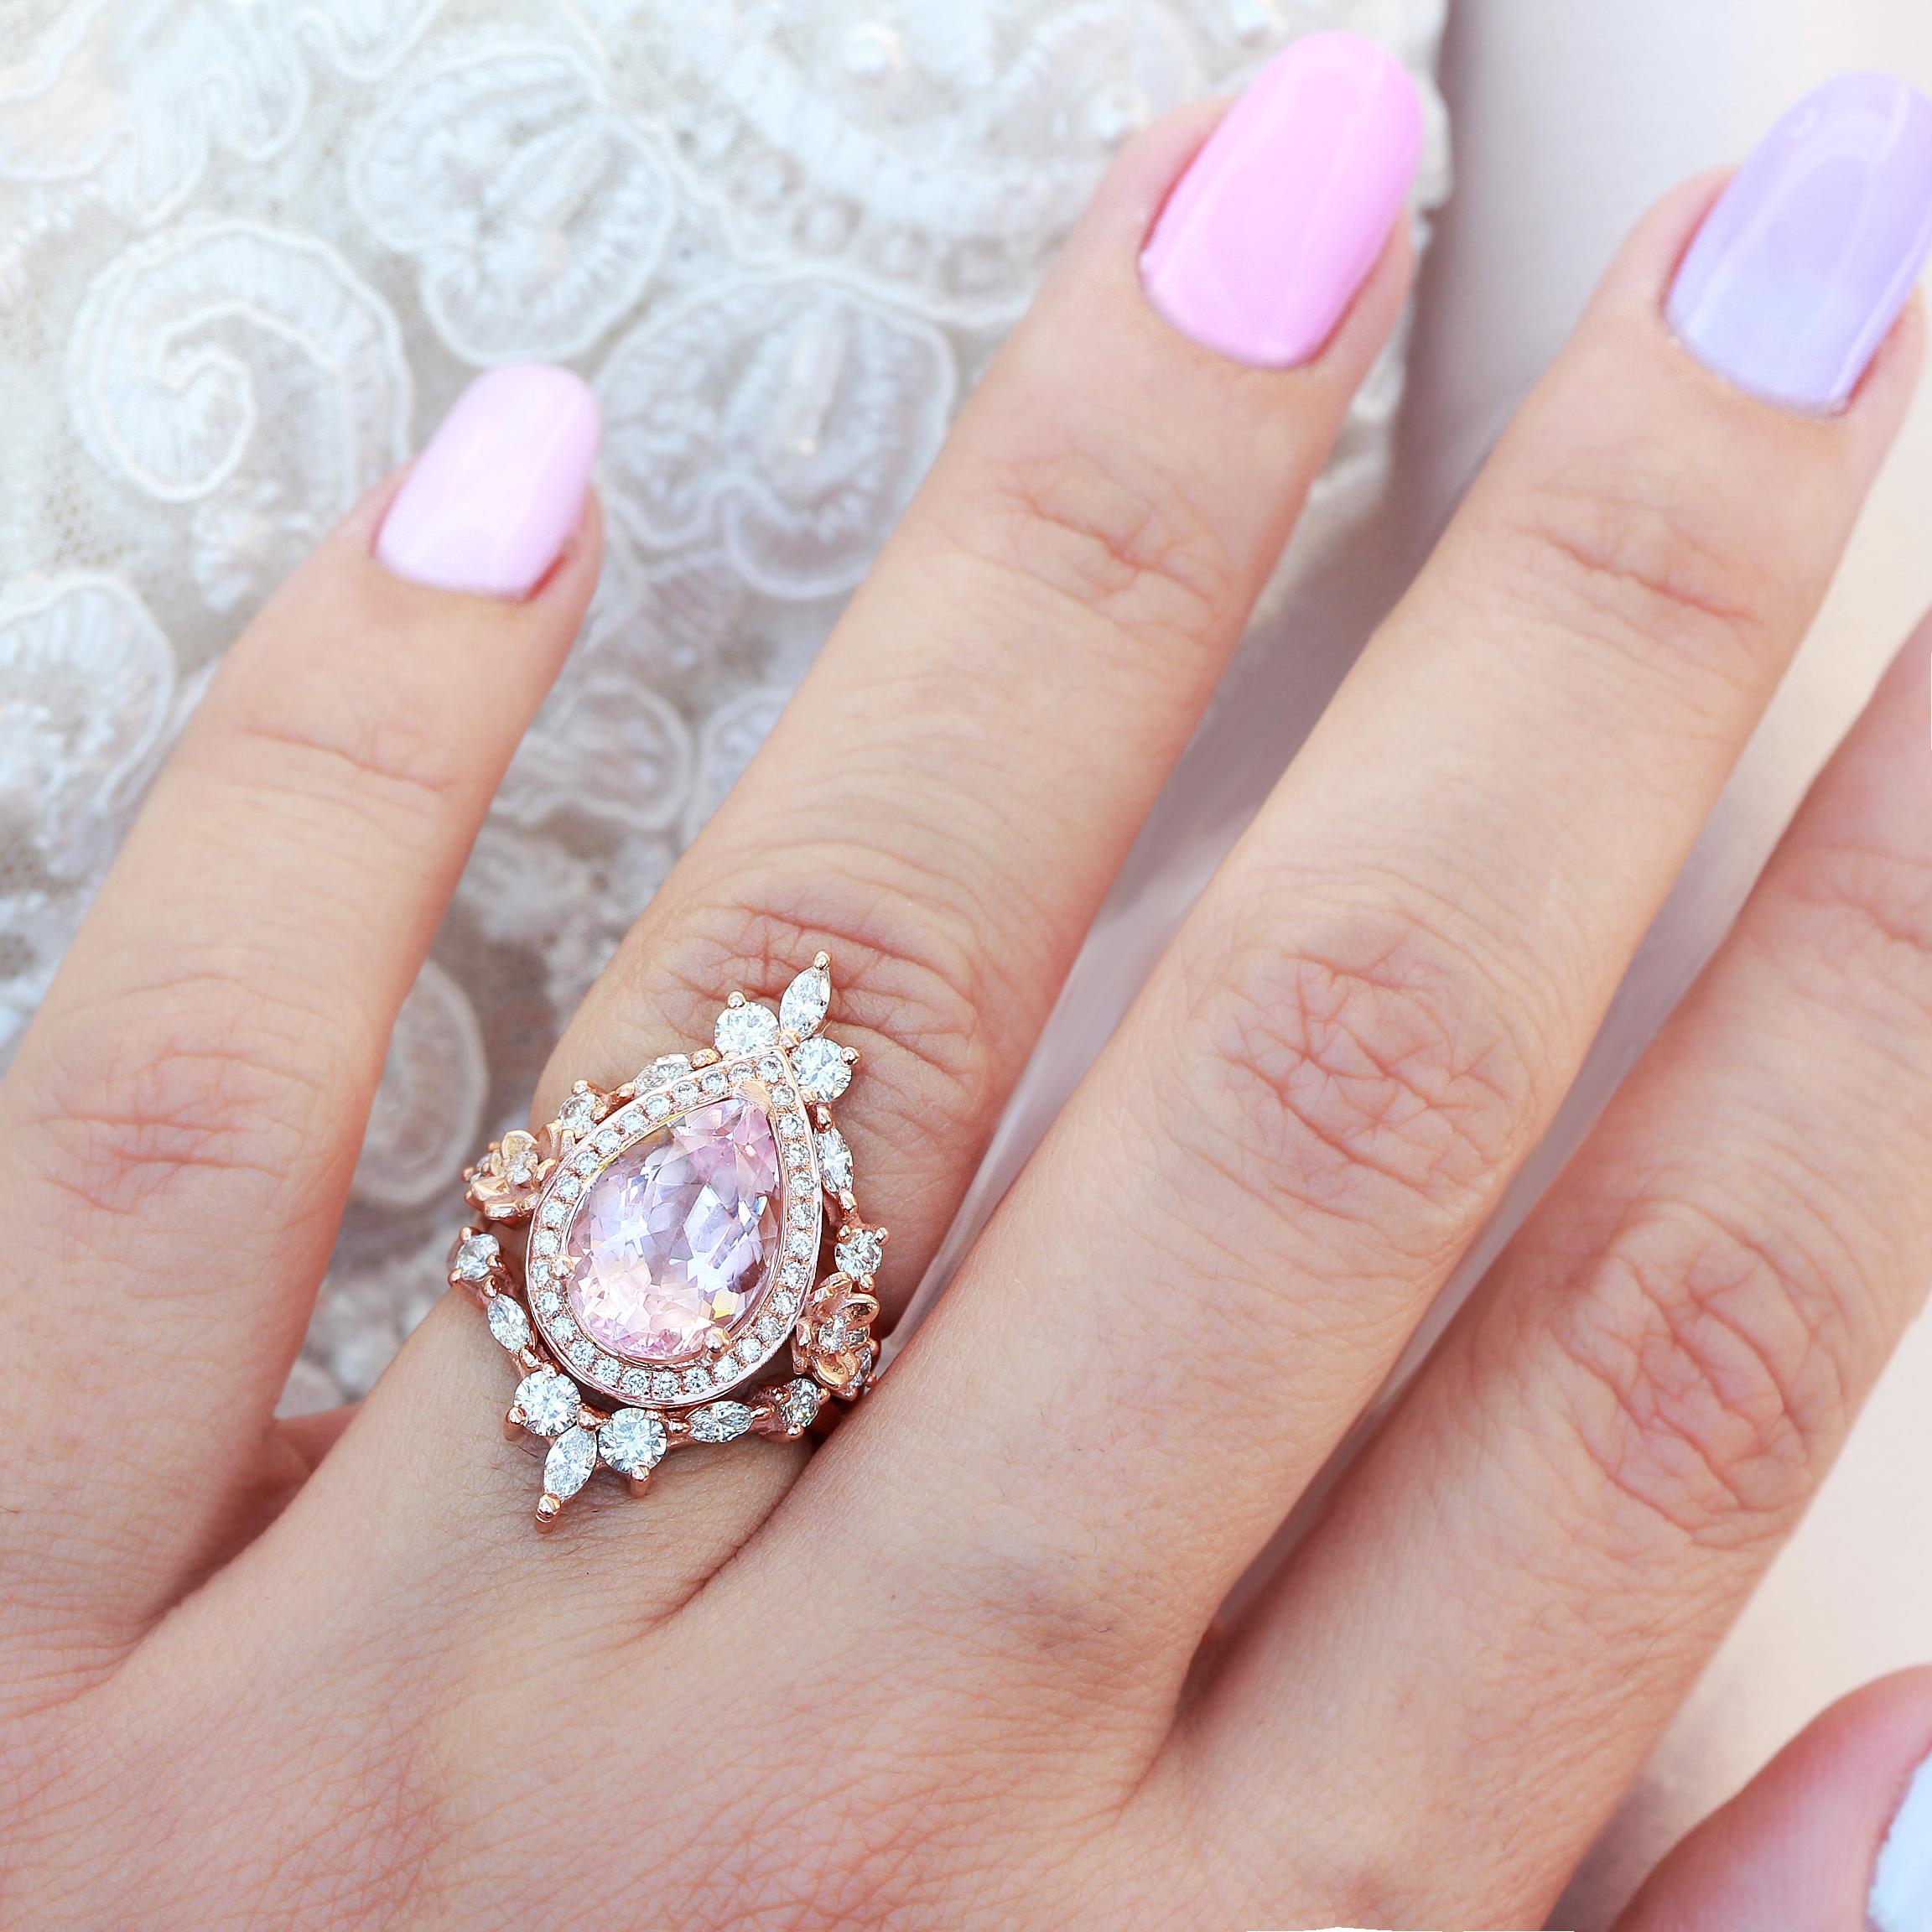 Excellent pear-shaped morganite engagement three rings set with diamond wedding bands - Antheia.
Antheia was the goddess of flowers and flowery wreaths.
Handmade with care. 
An original design by Silly Shiny Diamonds. 

Details: 
* Center Stone